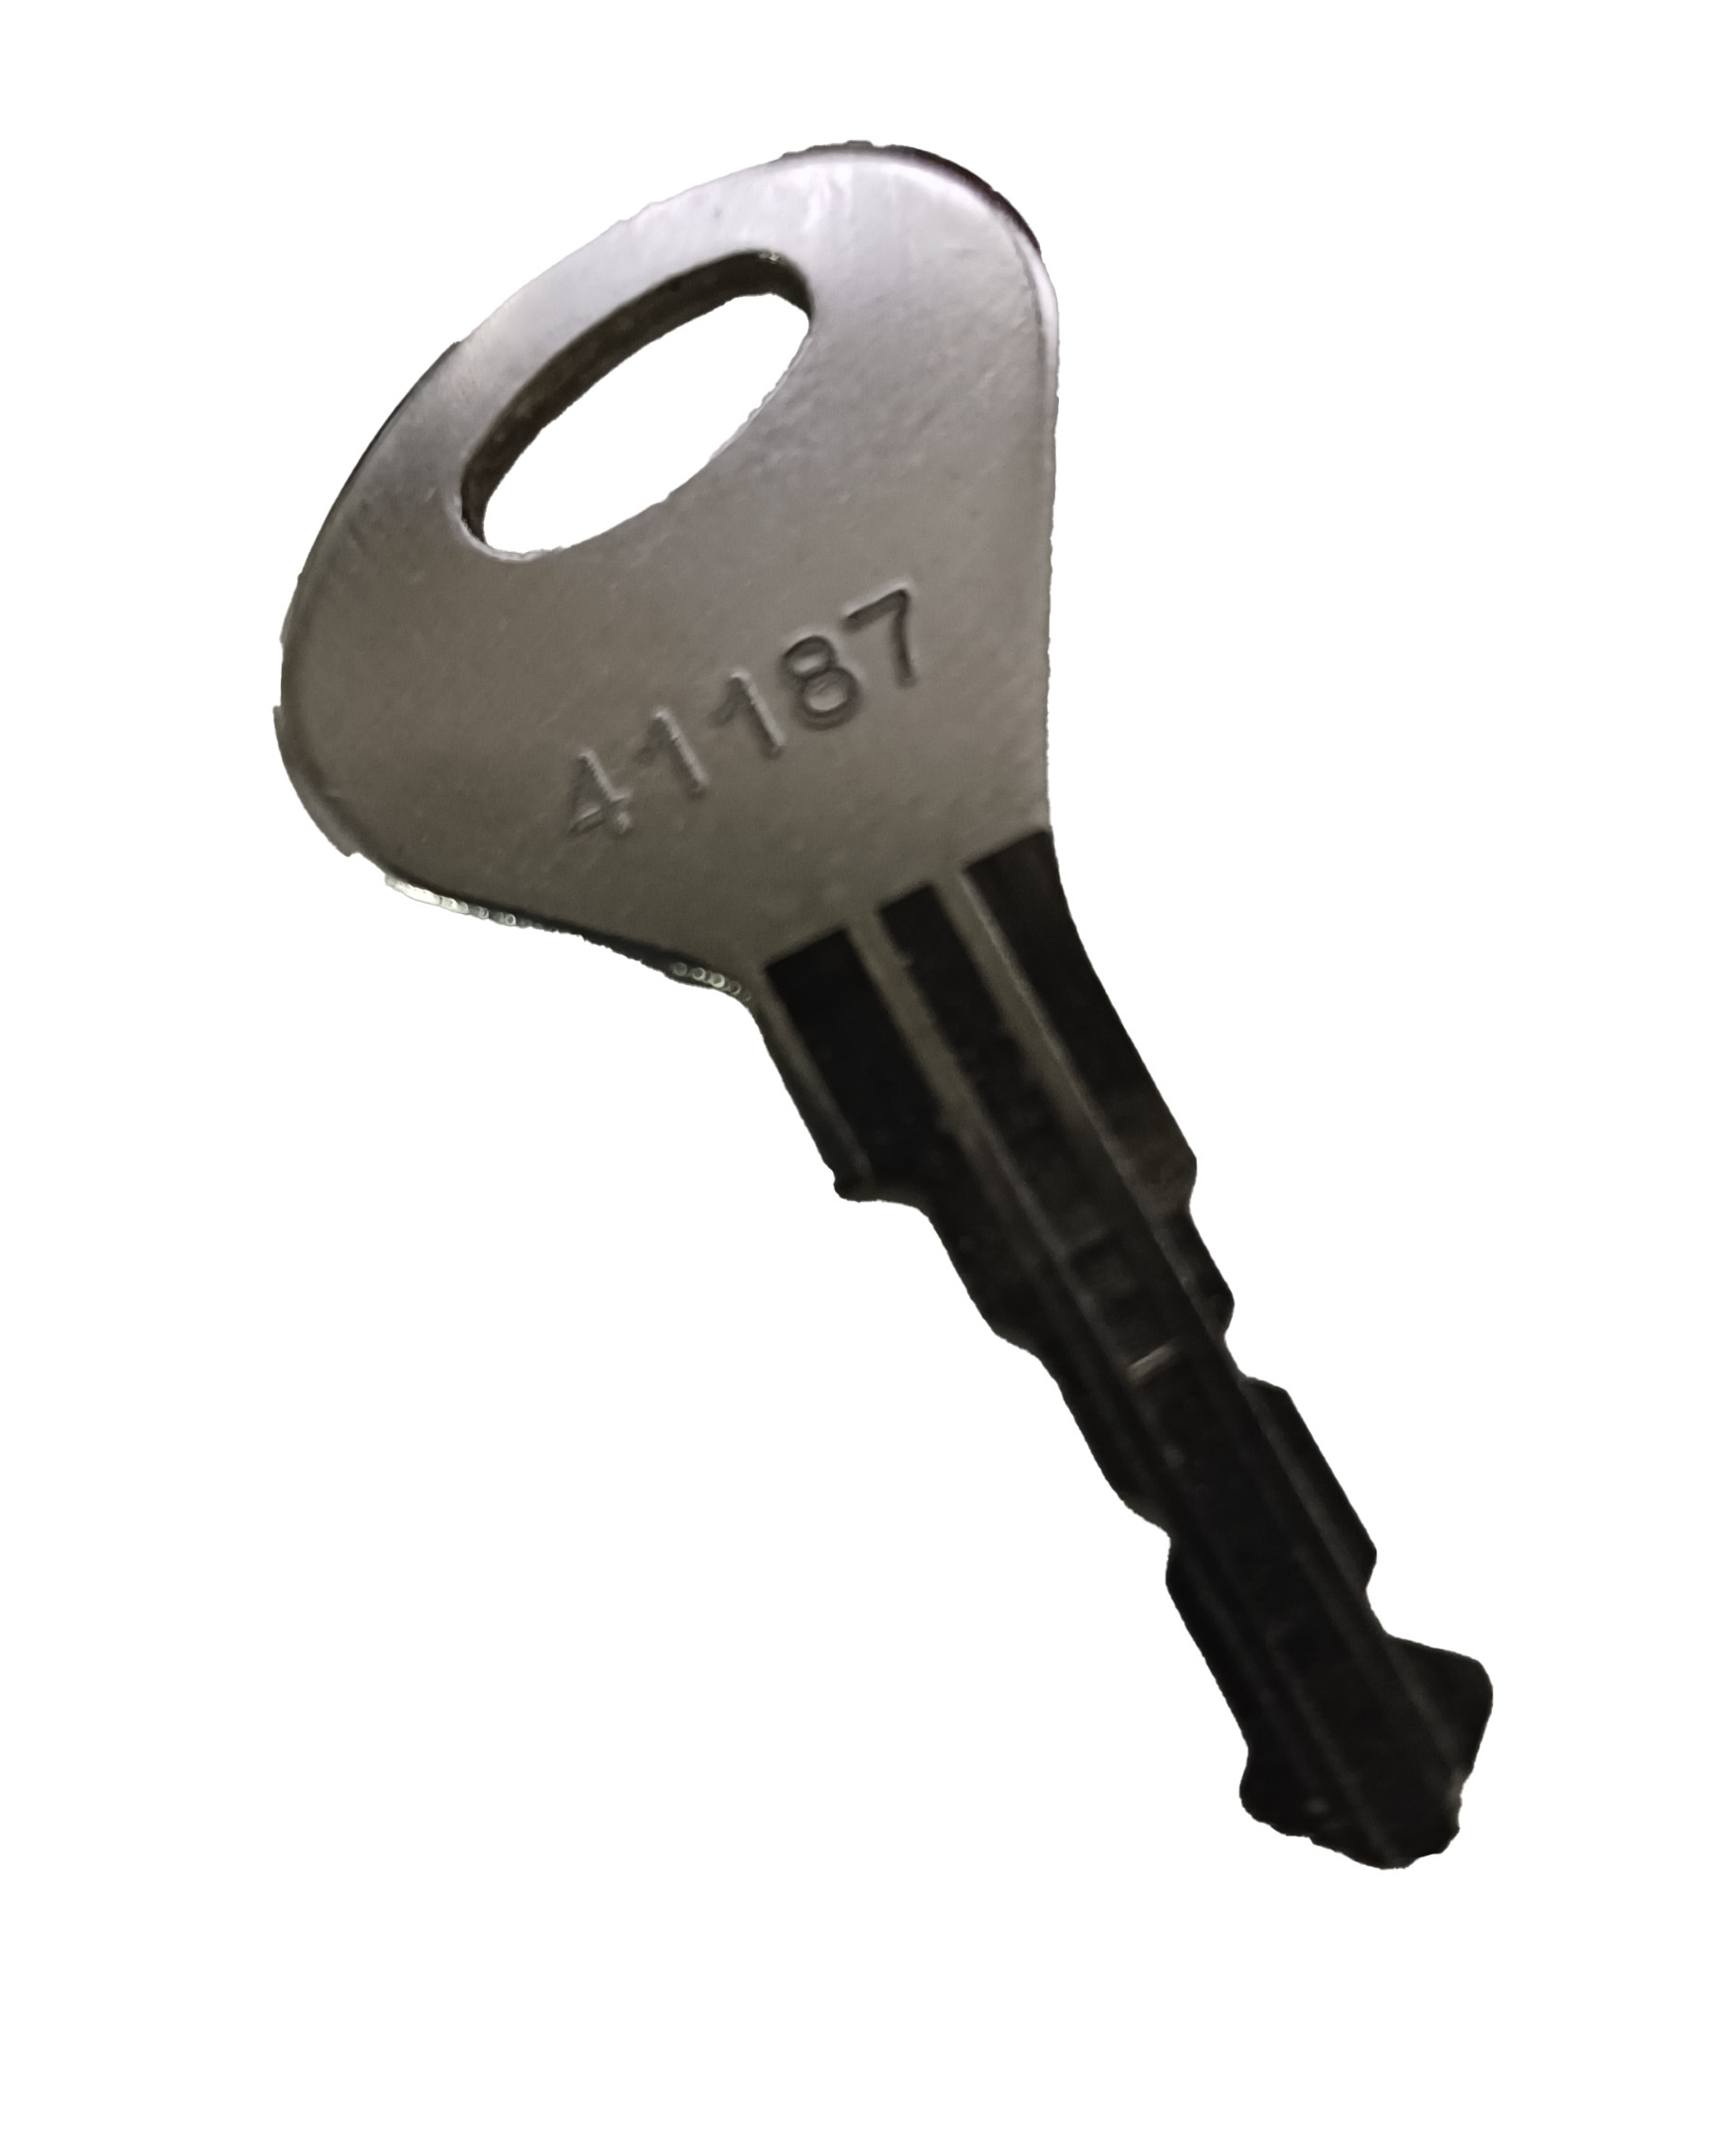 Pure locker key cutting next day delivery